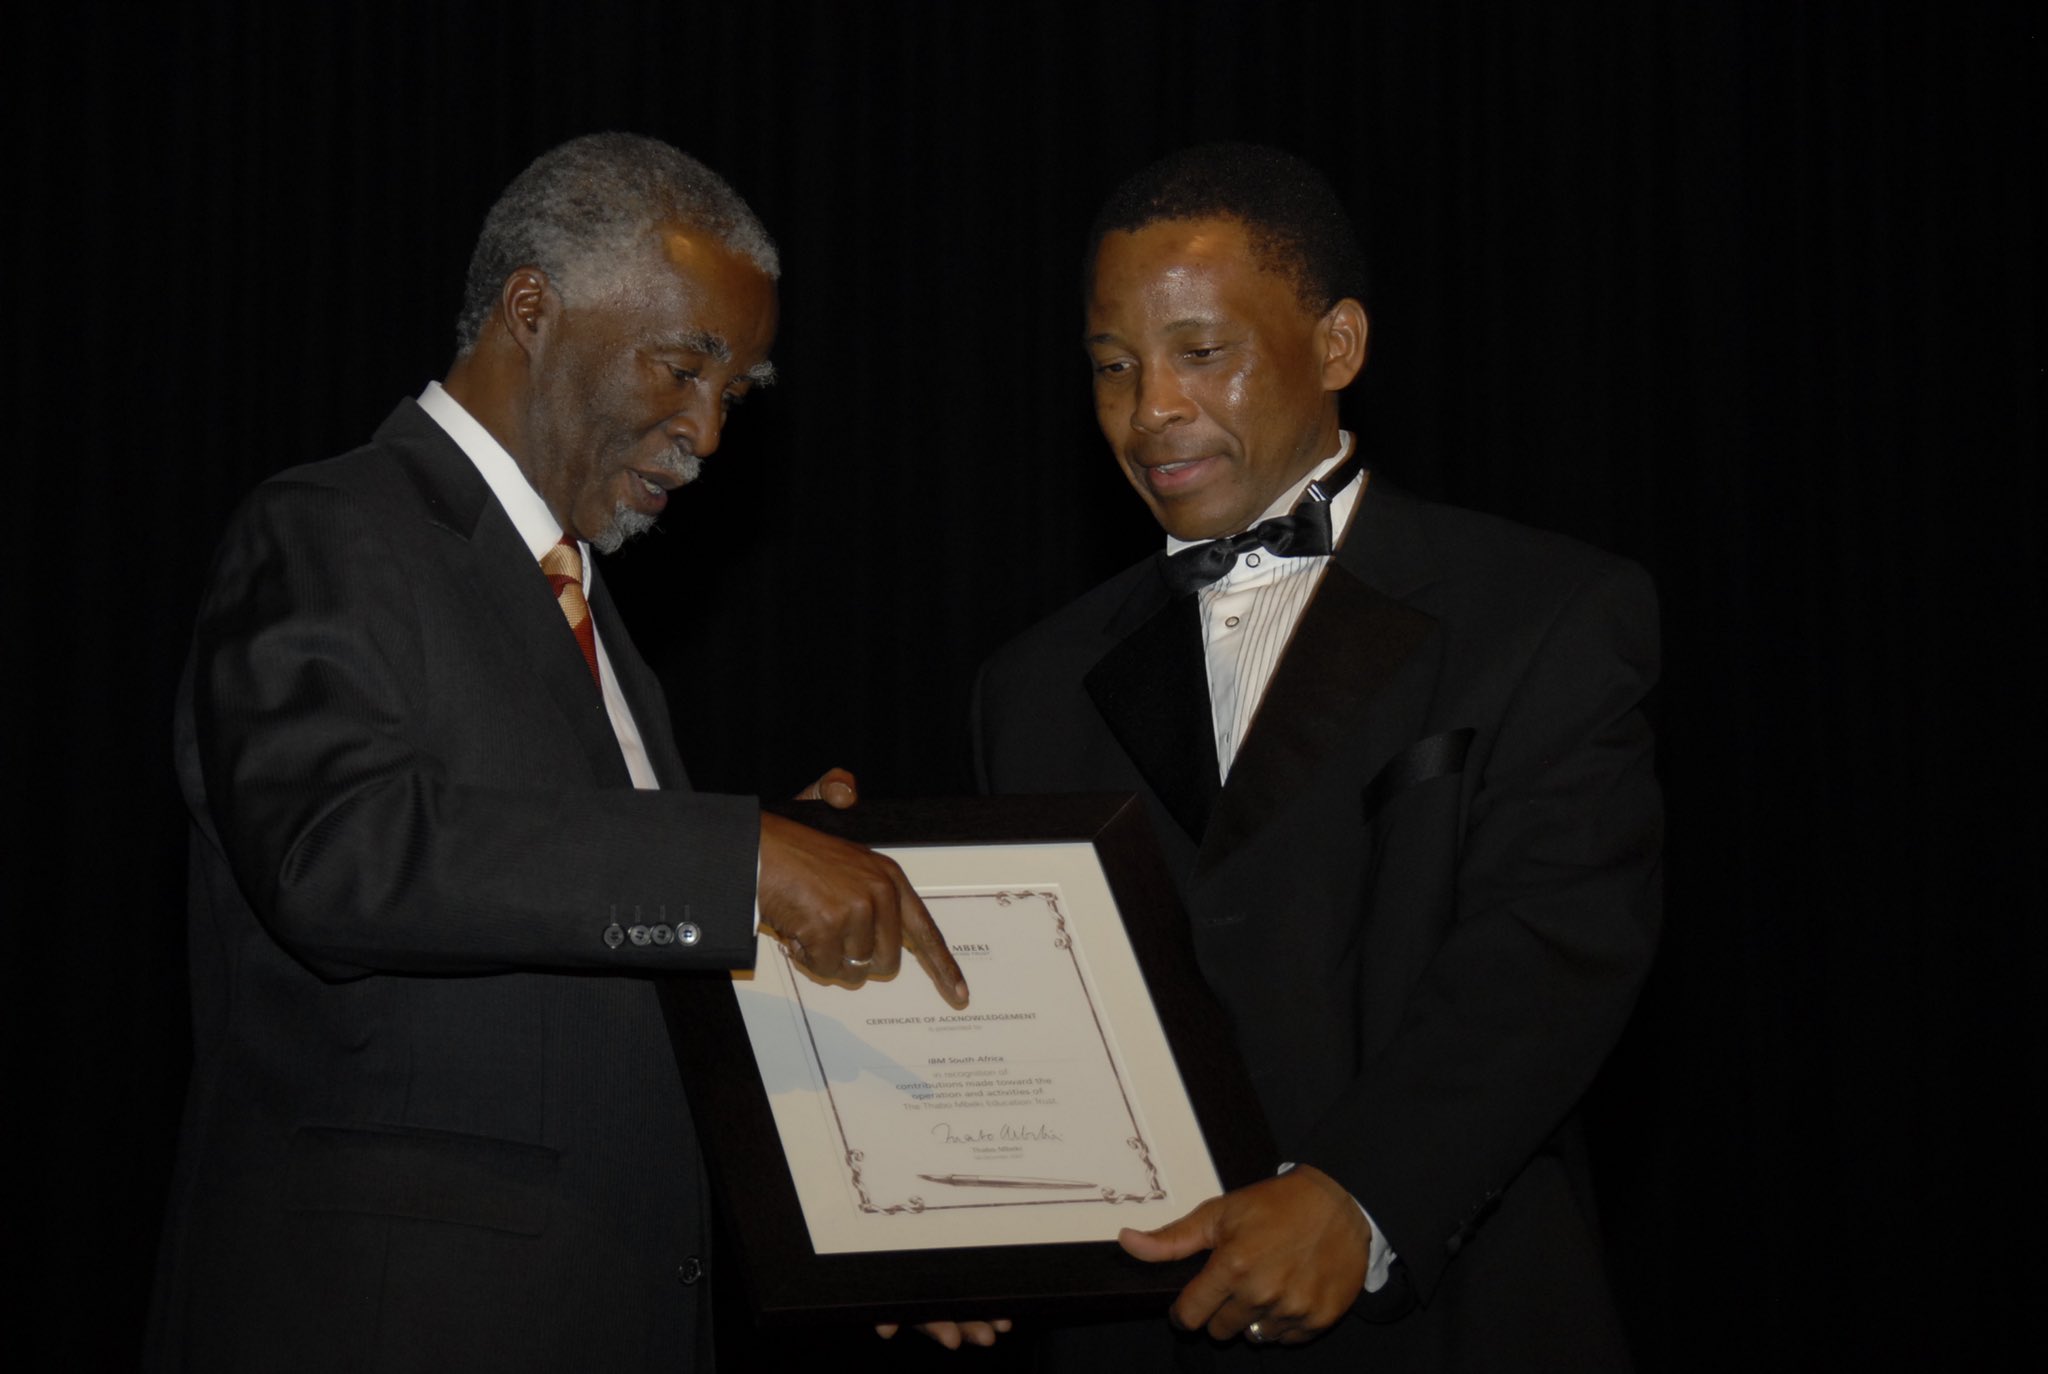 Happy birthday President Thabo Mbeki - you continue to inspire us from far. 